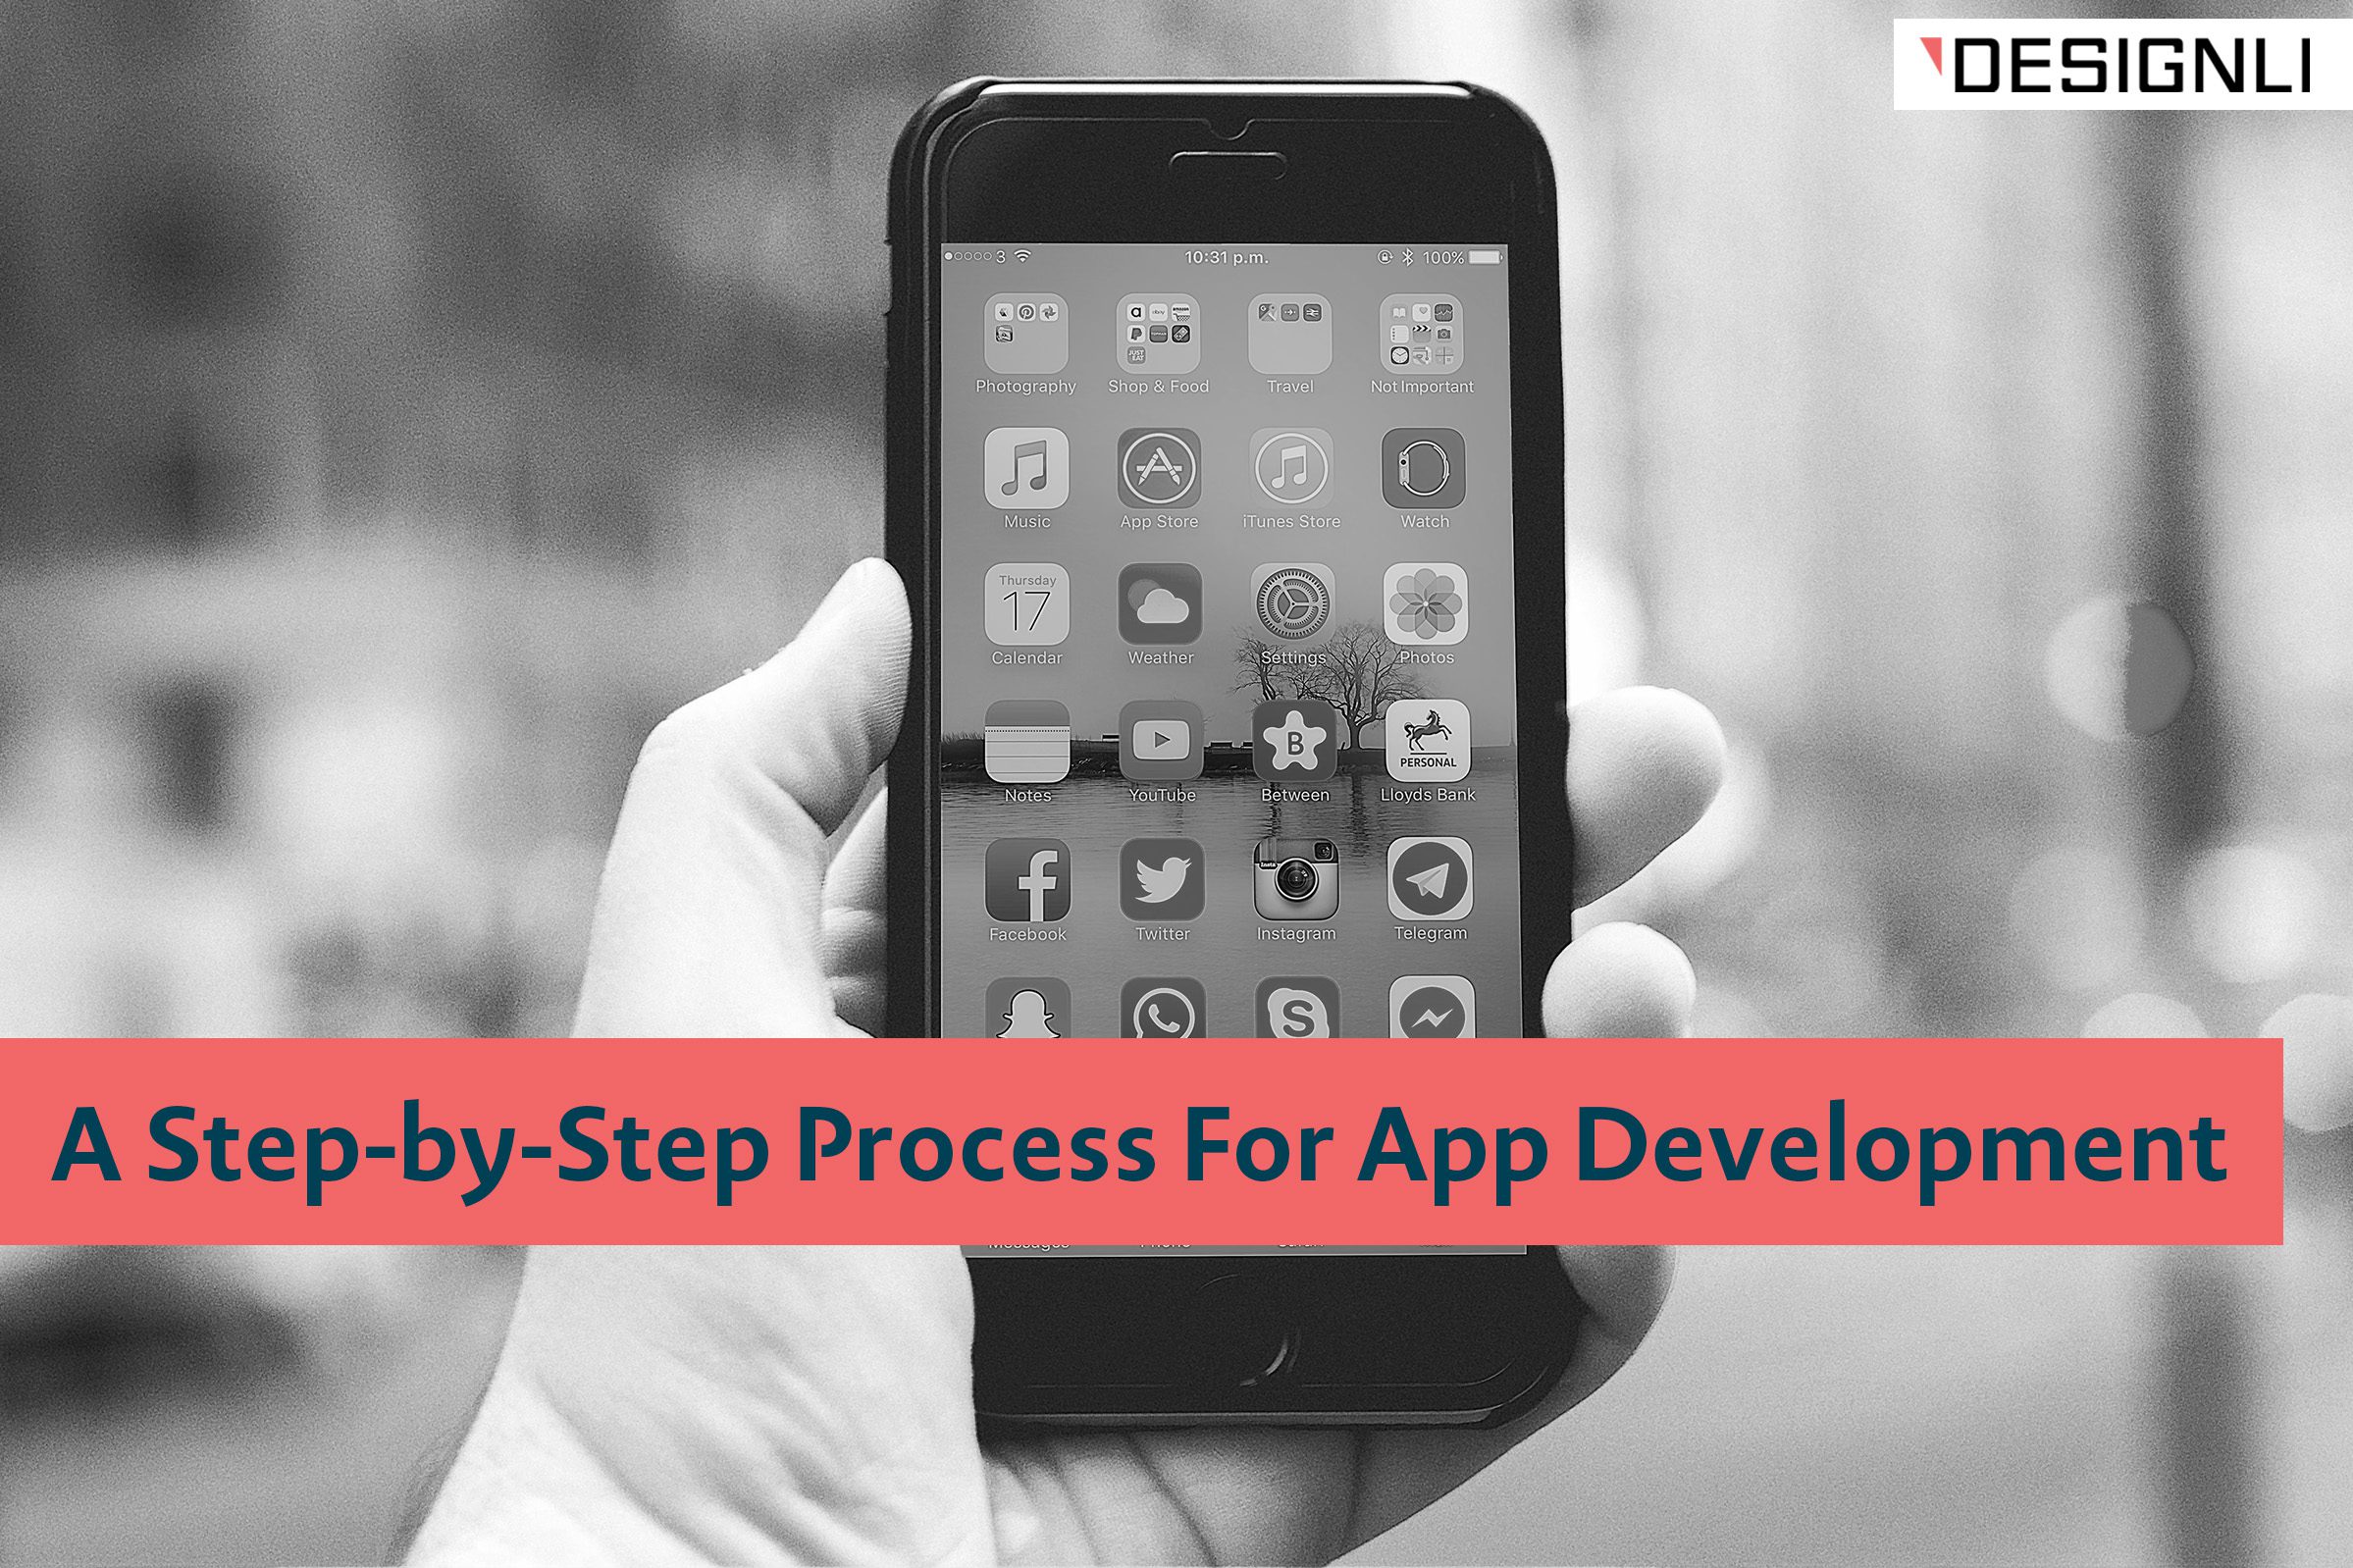 A Step-by-Step Process For App Development